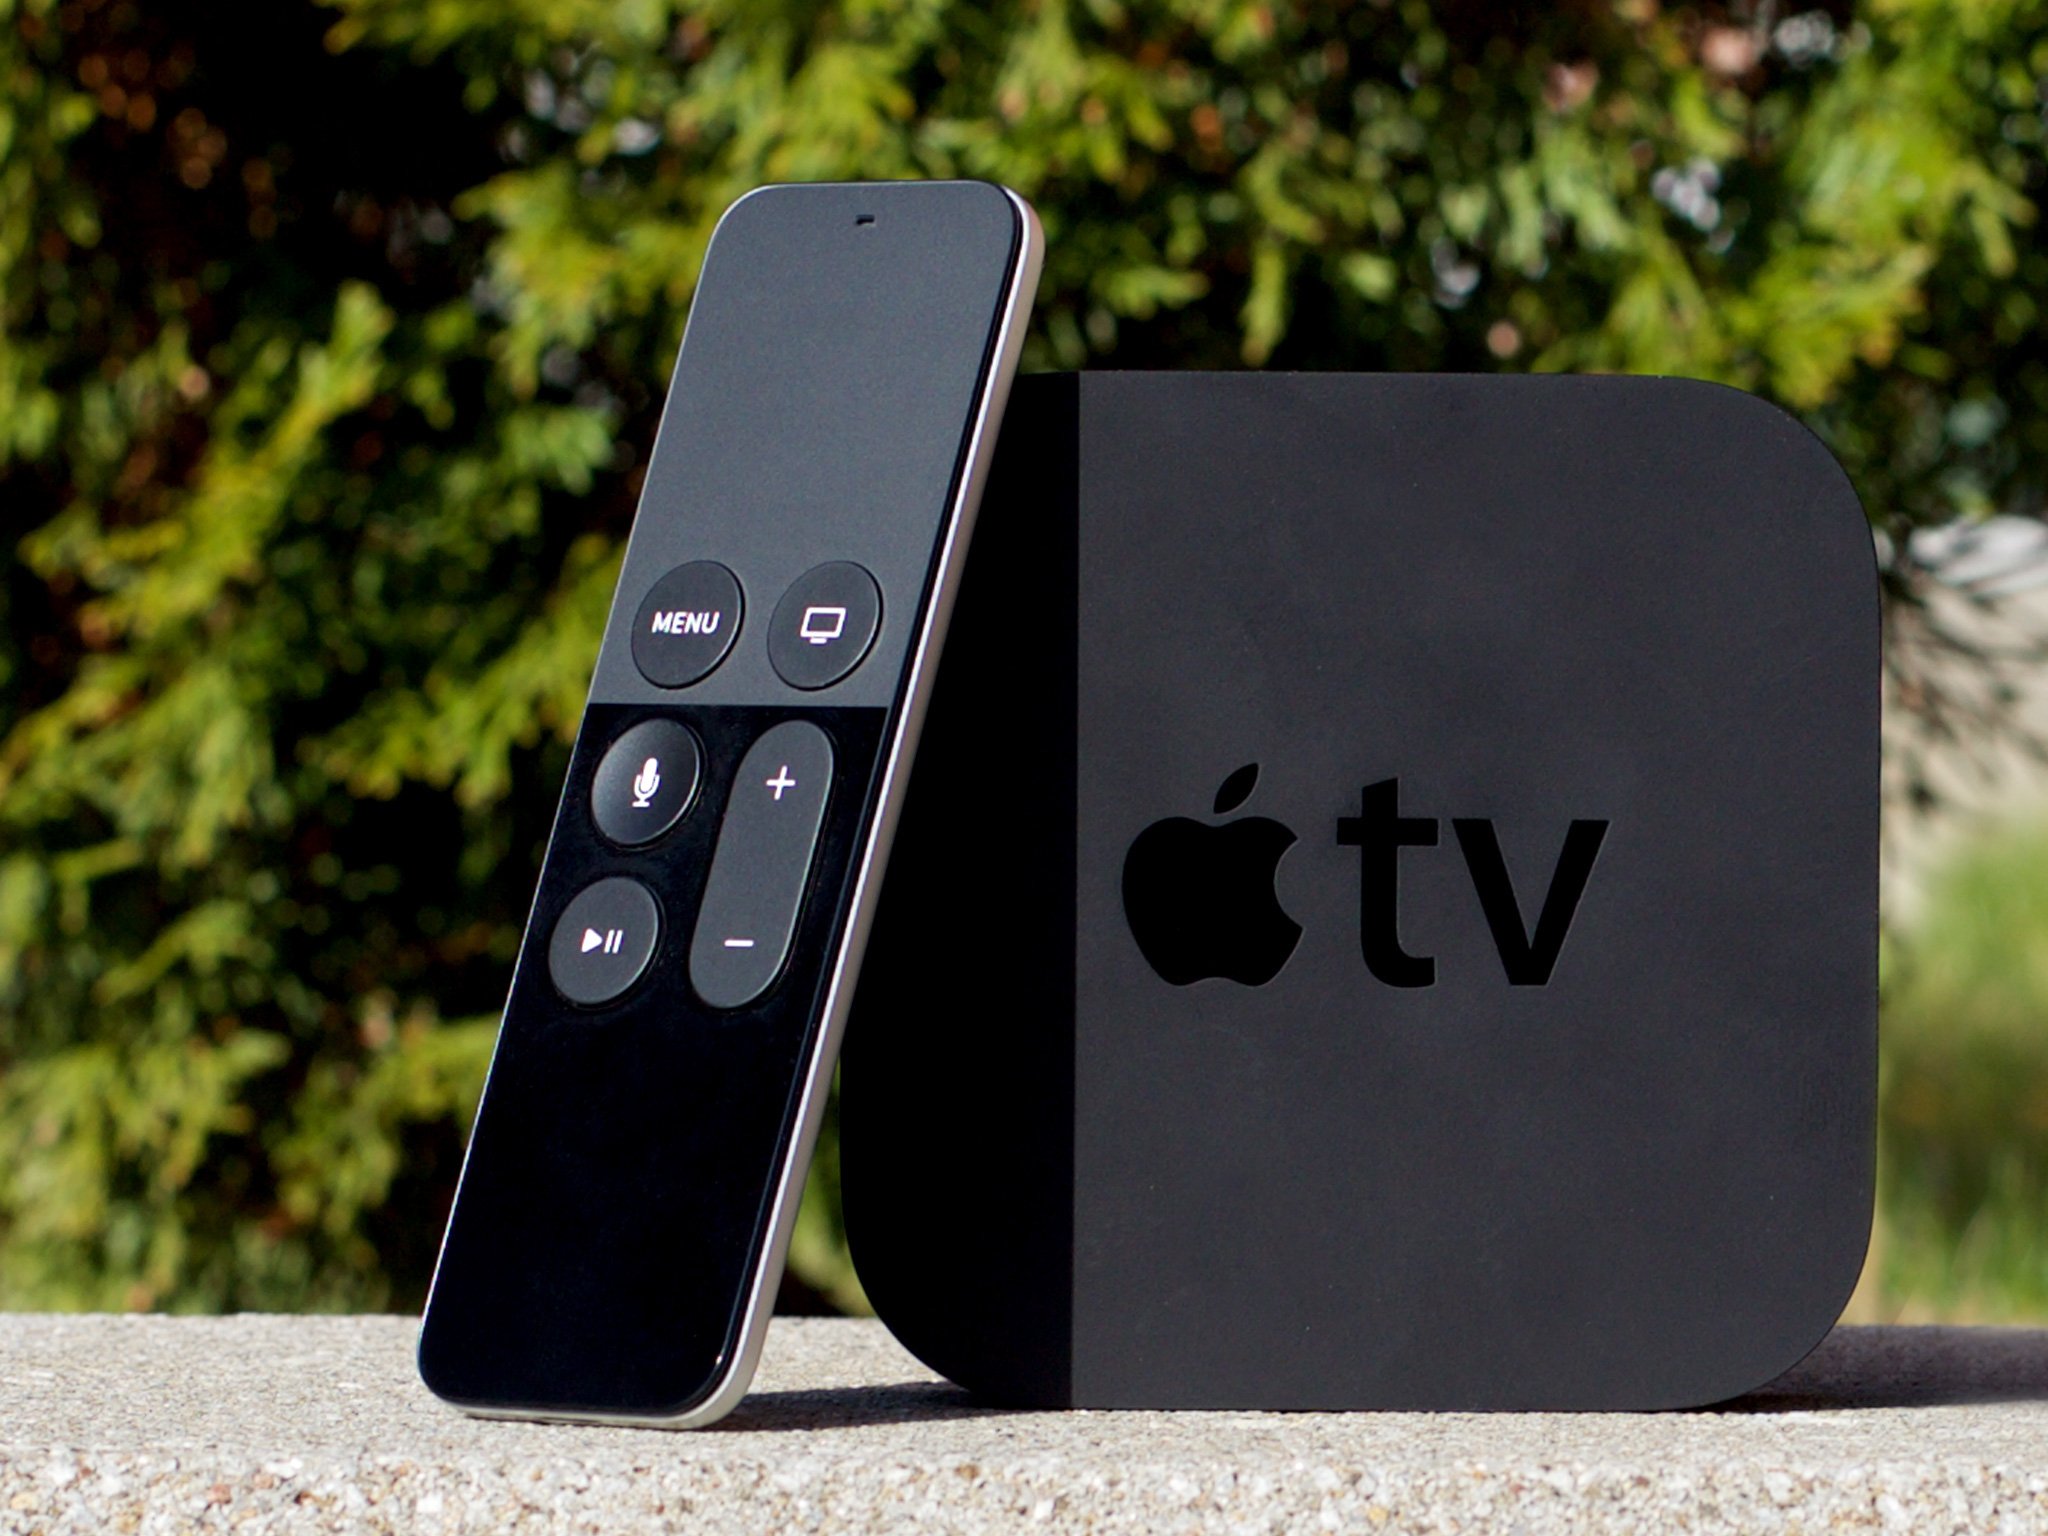 How to install tvOS 12 beta 1 on your Apple TV